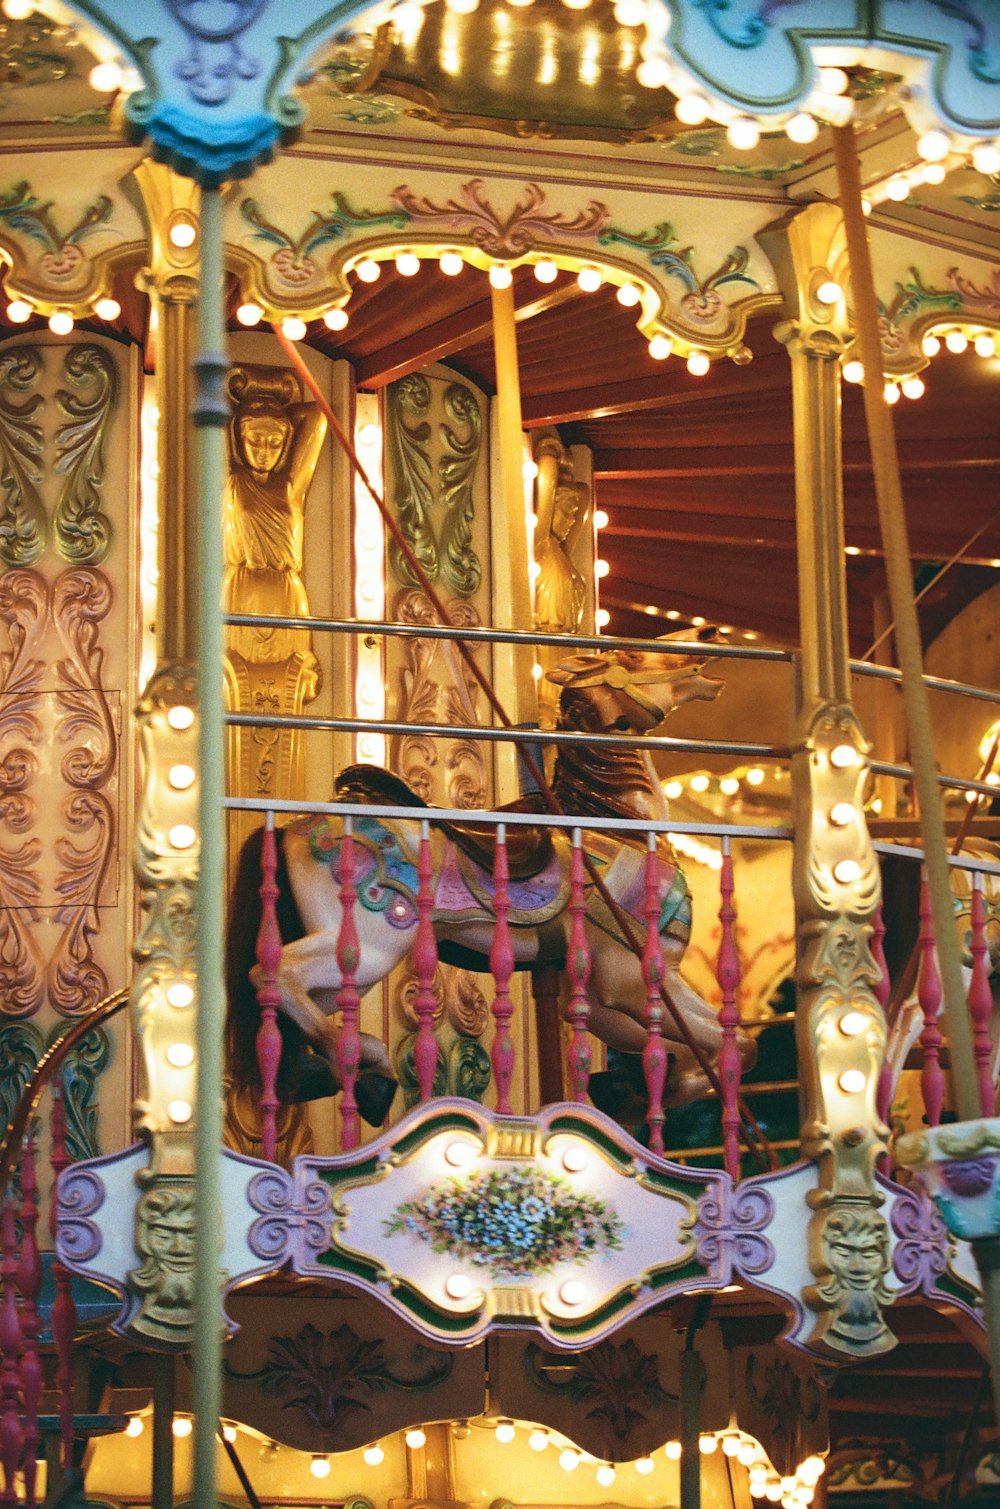 a merry go round with lights and decorations